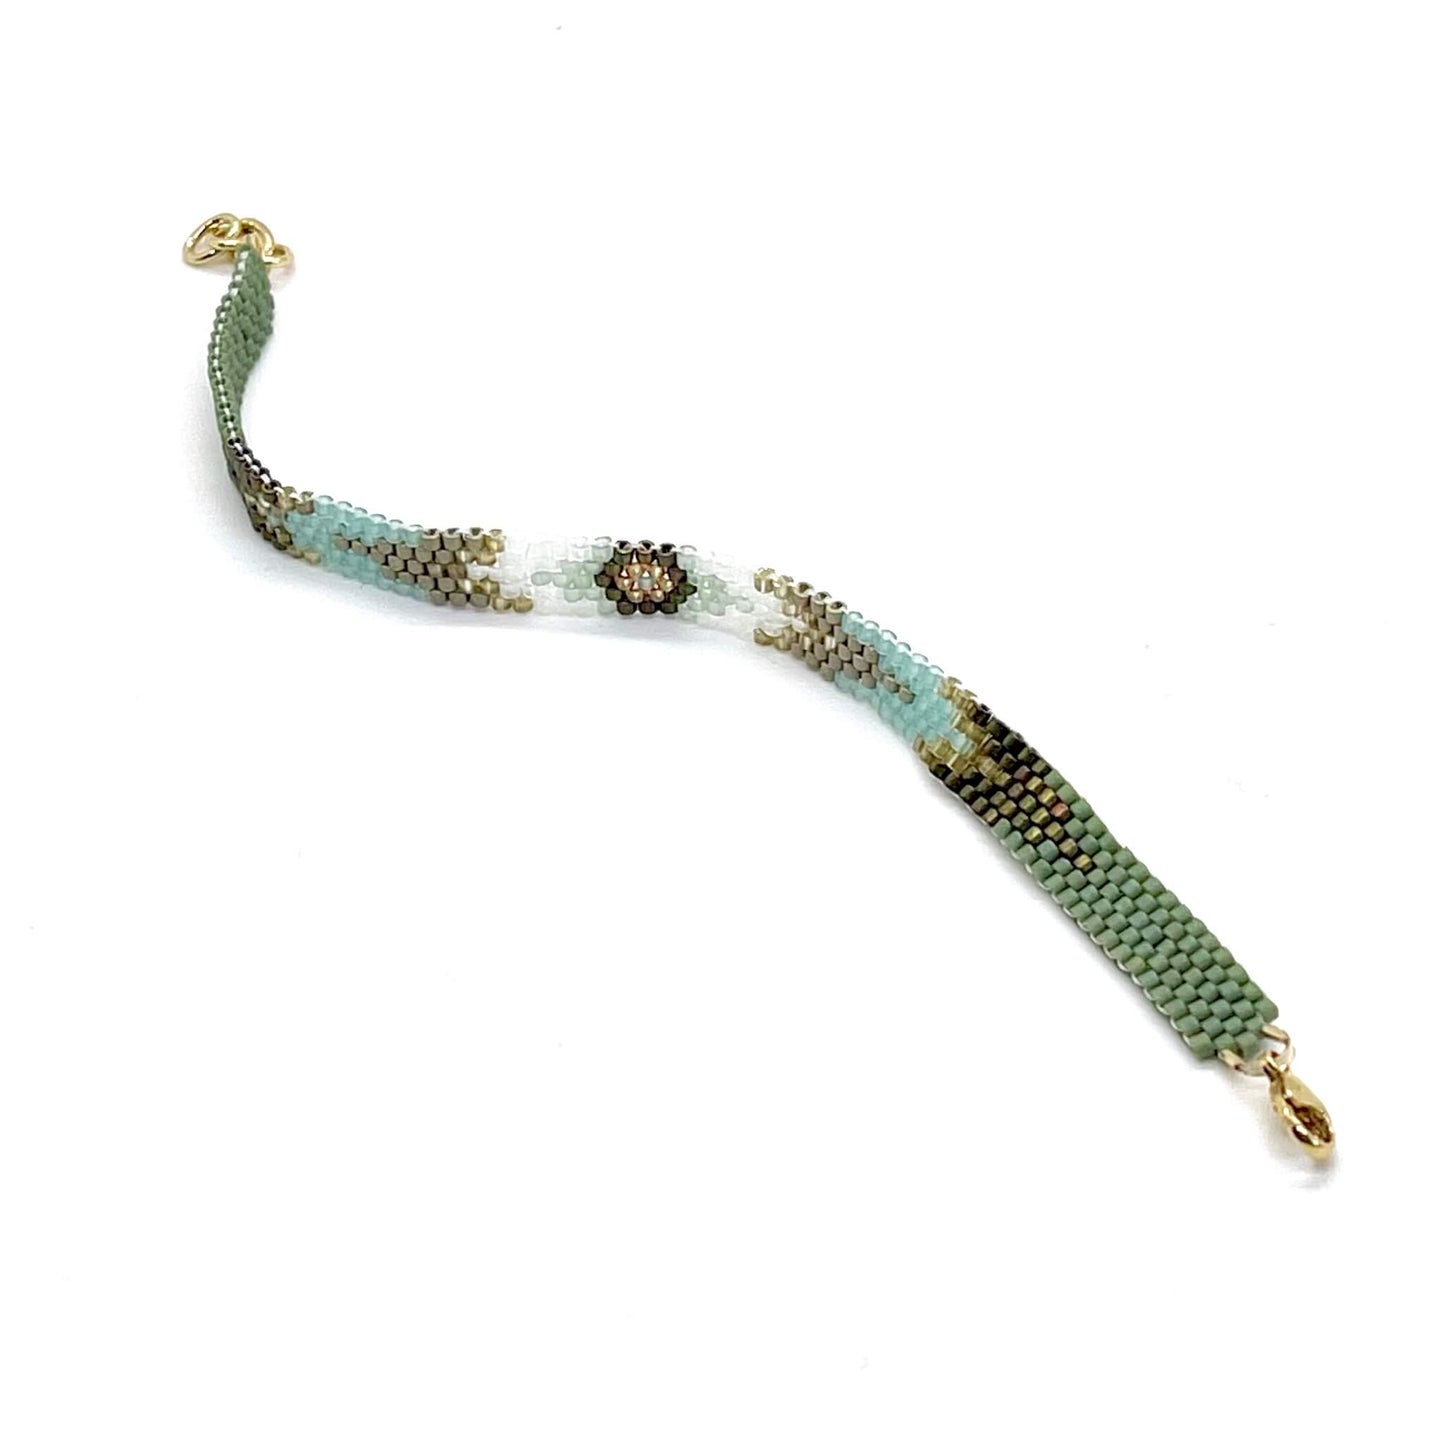 Arrow seed bead bracelet in sage, green, ivory, and gold. Woven beaded peyote stitch bracelet.